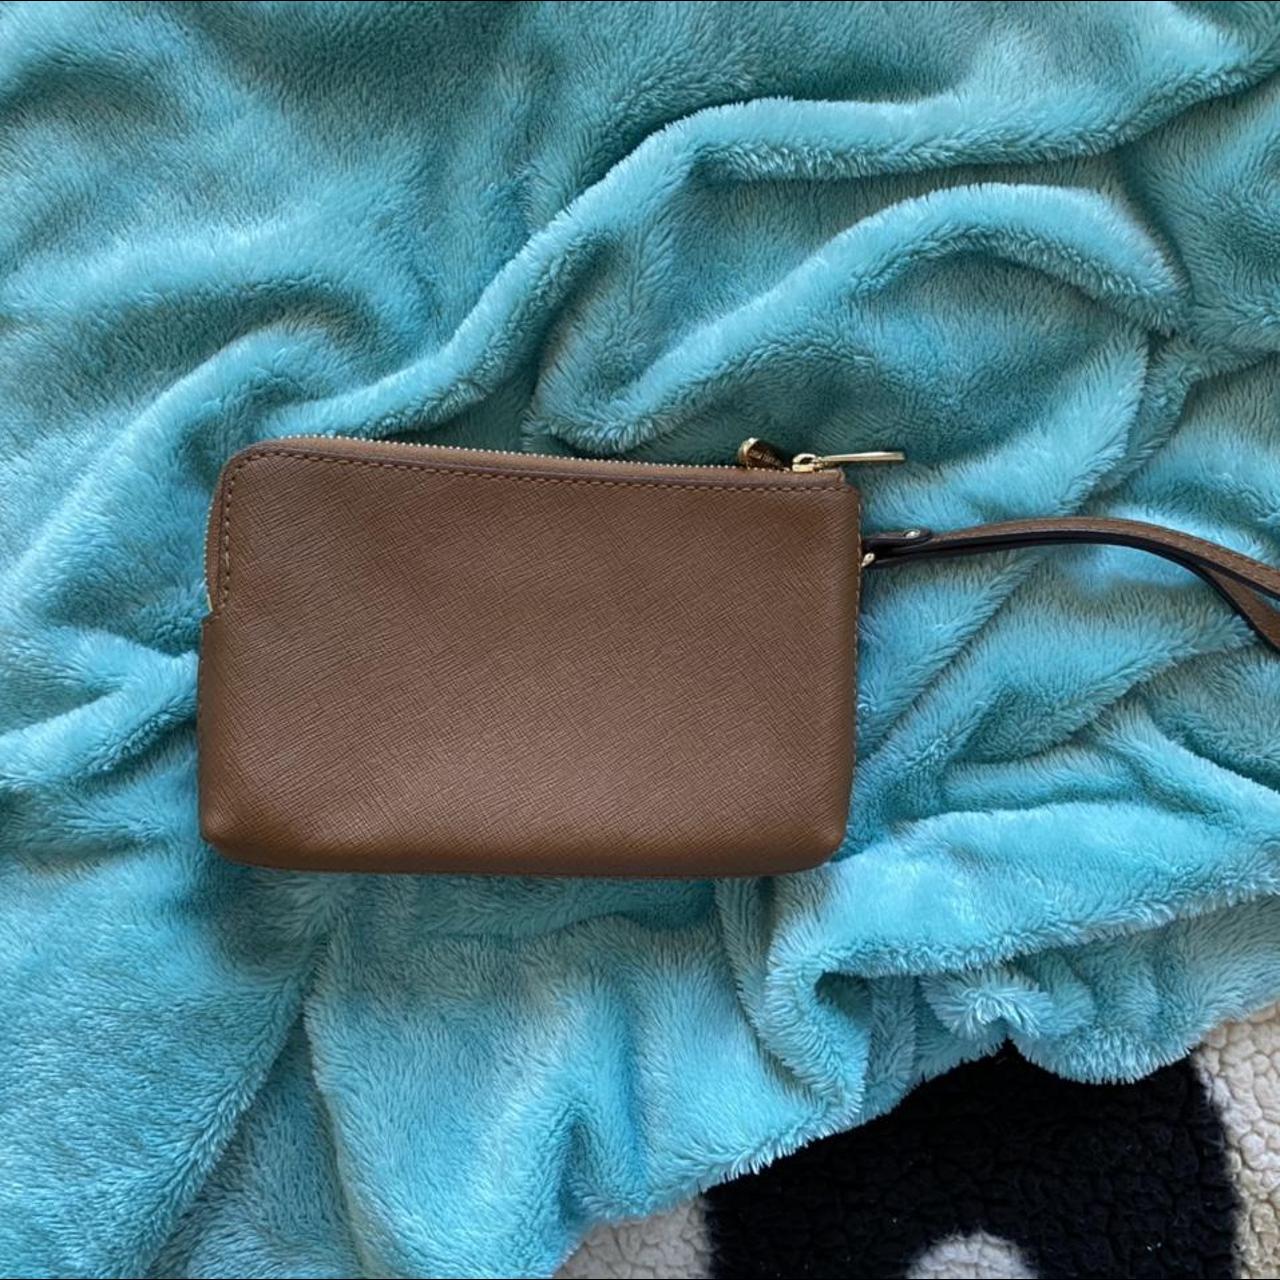 Product Image 2 - Michael kors wallet! Almost brand